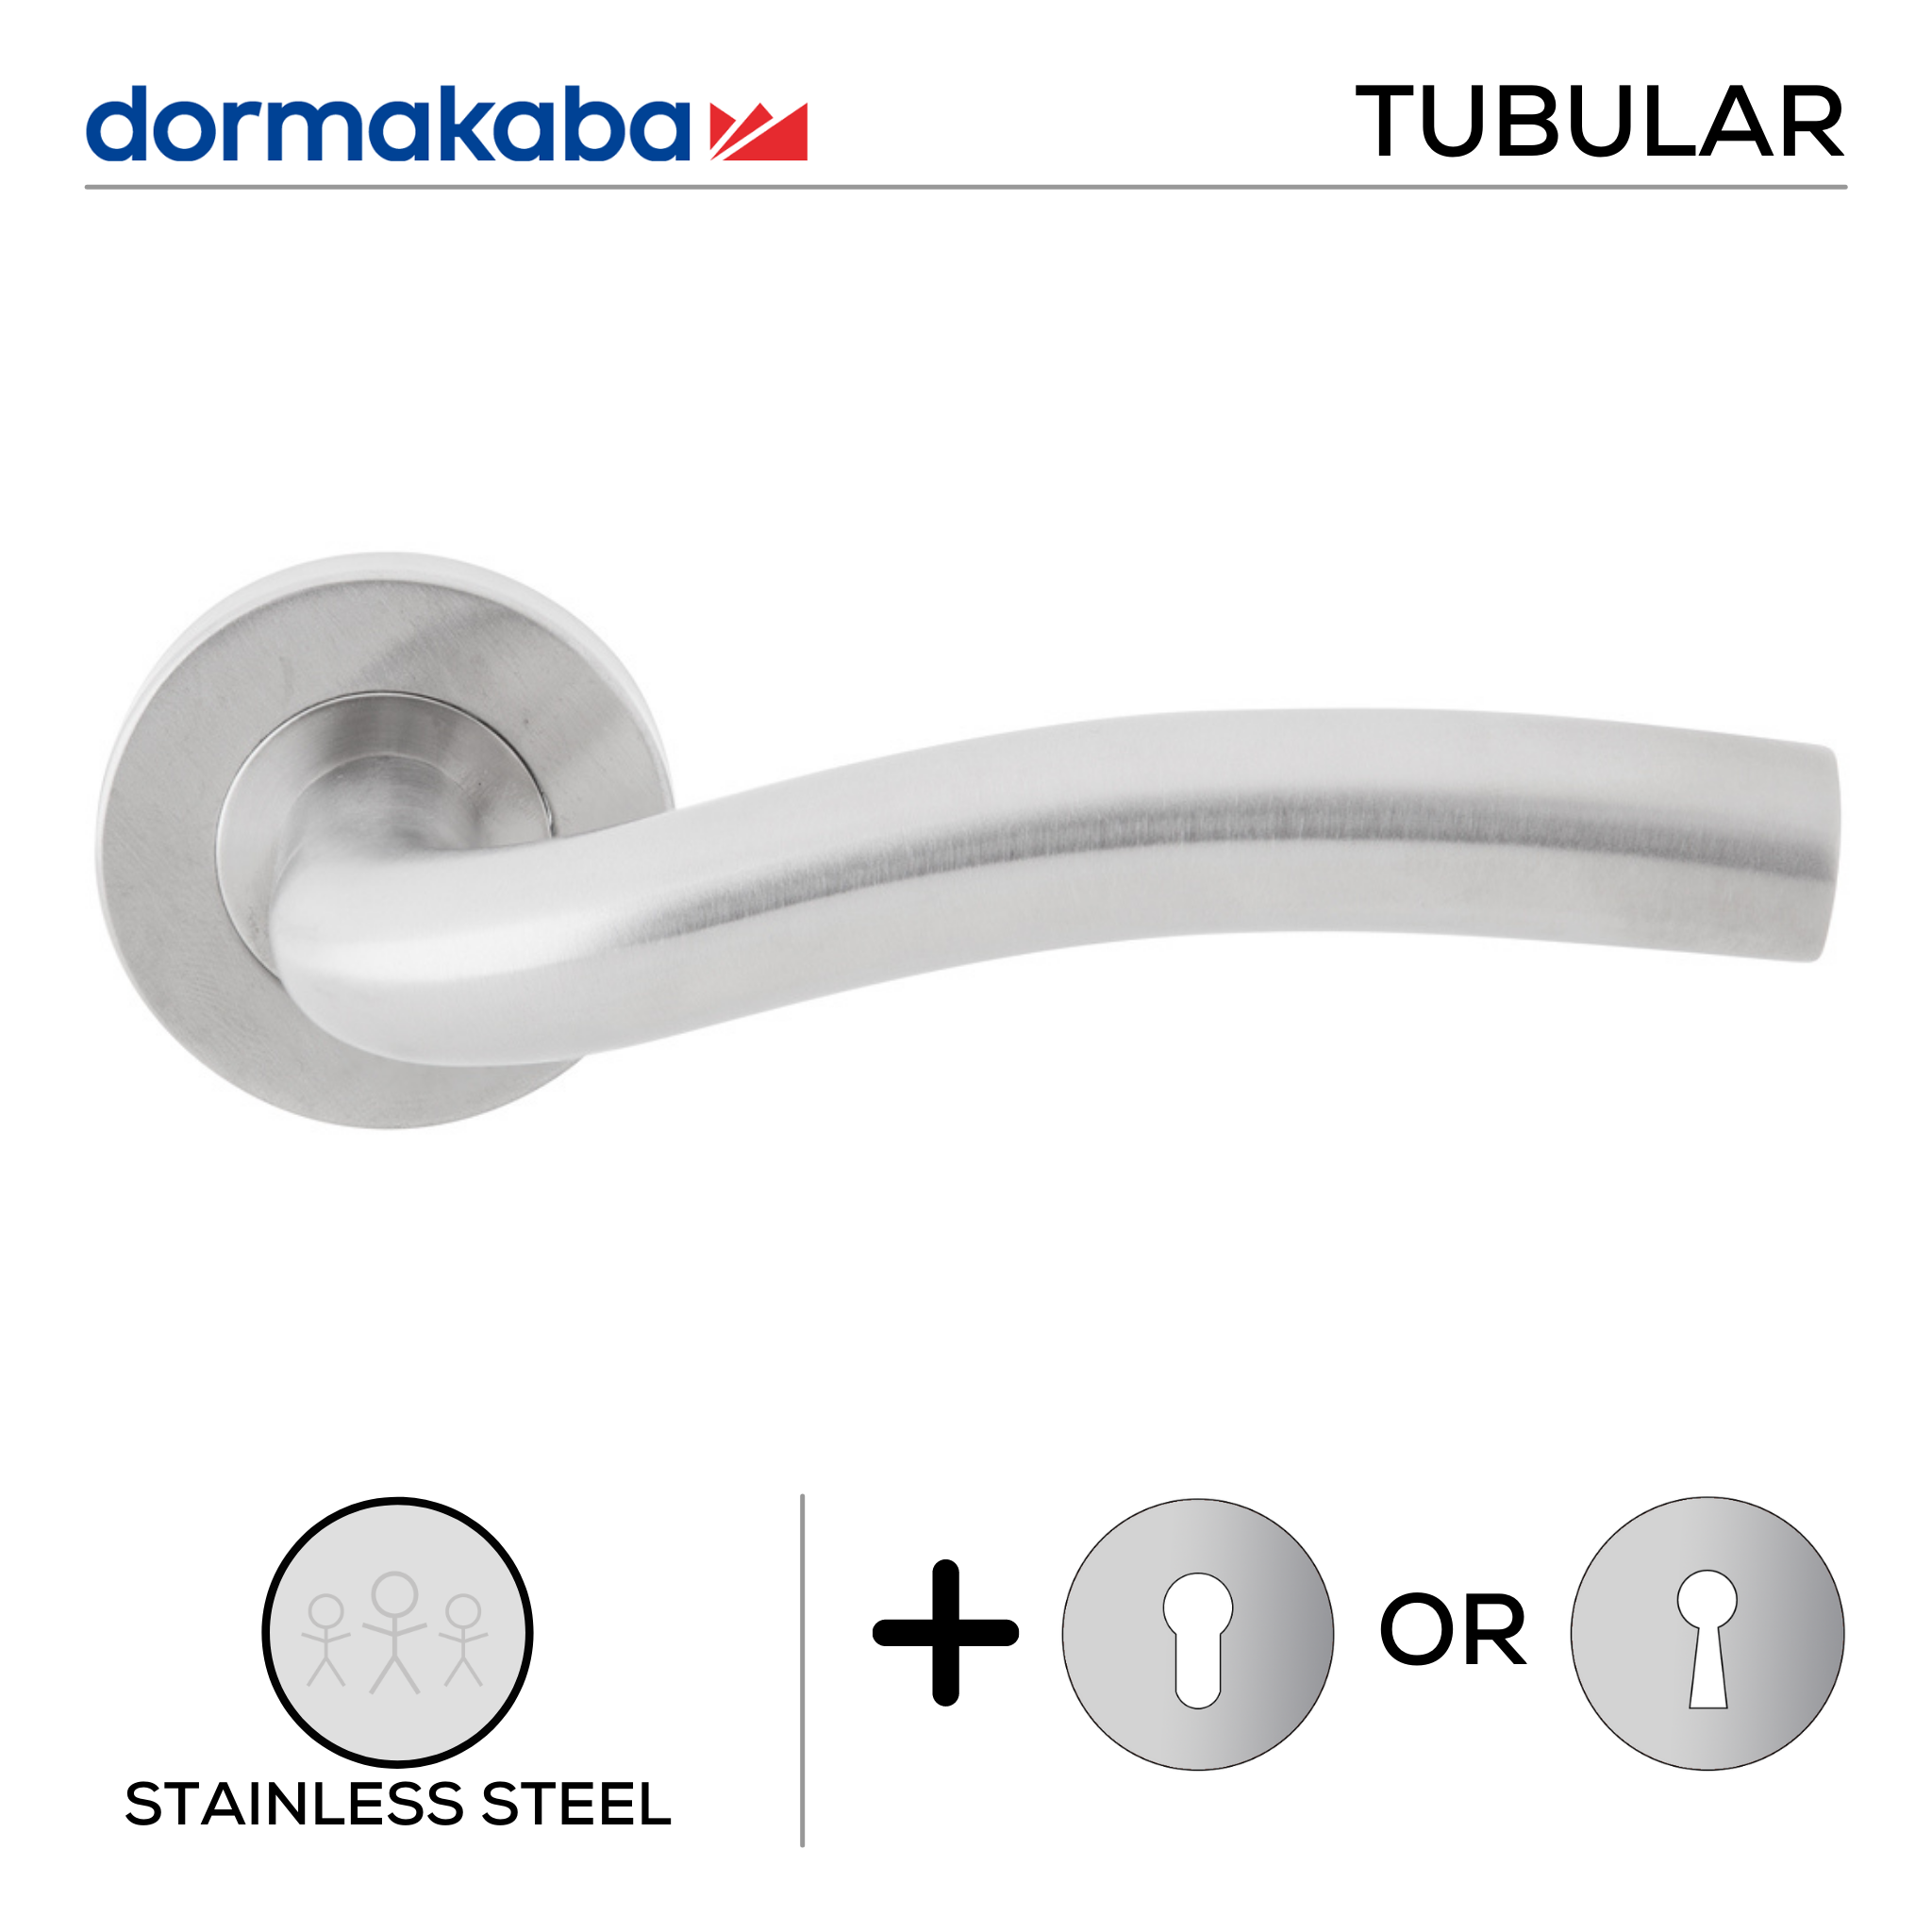 TH 122, Lever Handles, Tubular, On Round Rose, With Escutcheons, 148mm (l), Stainless Steel, DORMAKABA